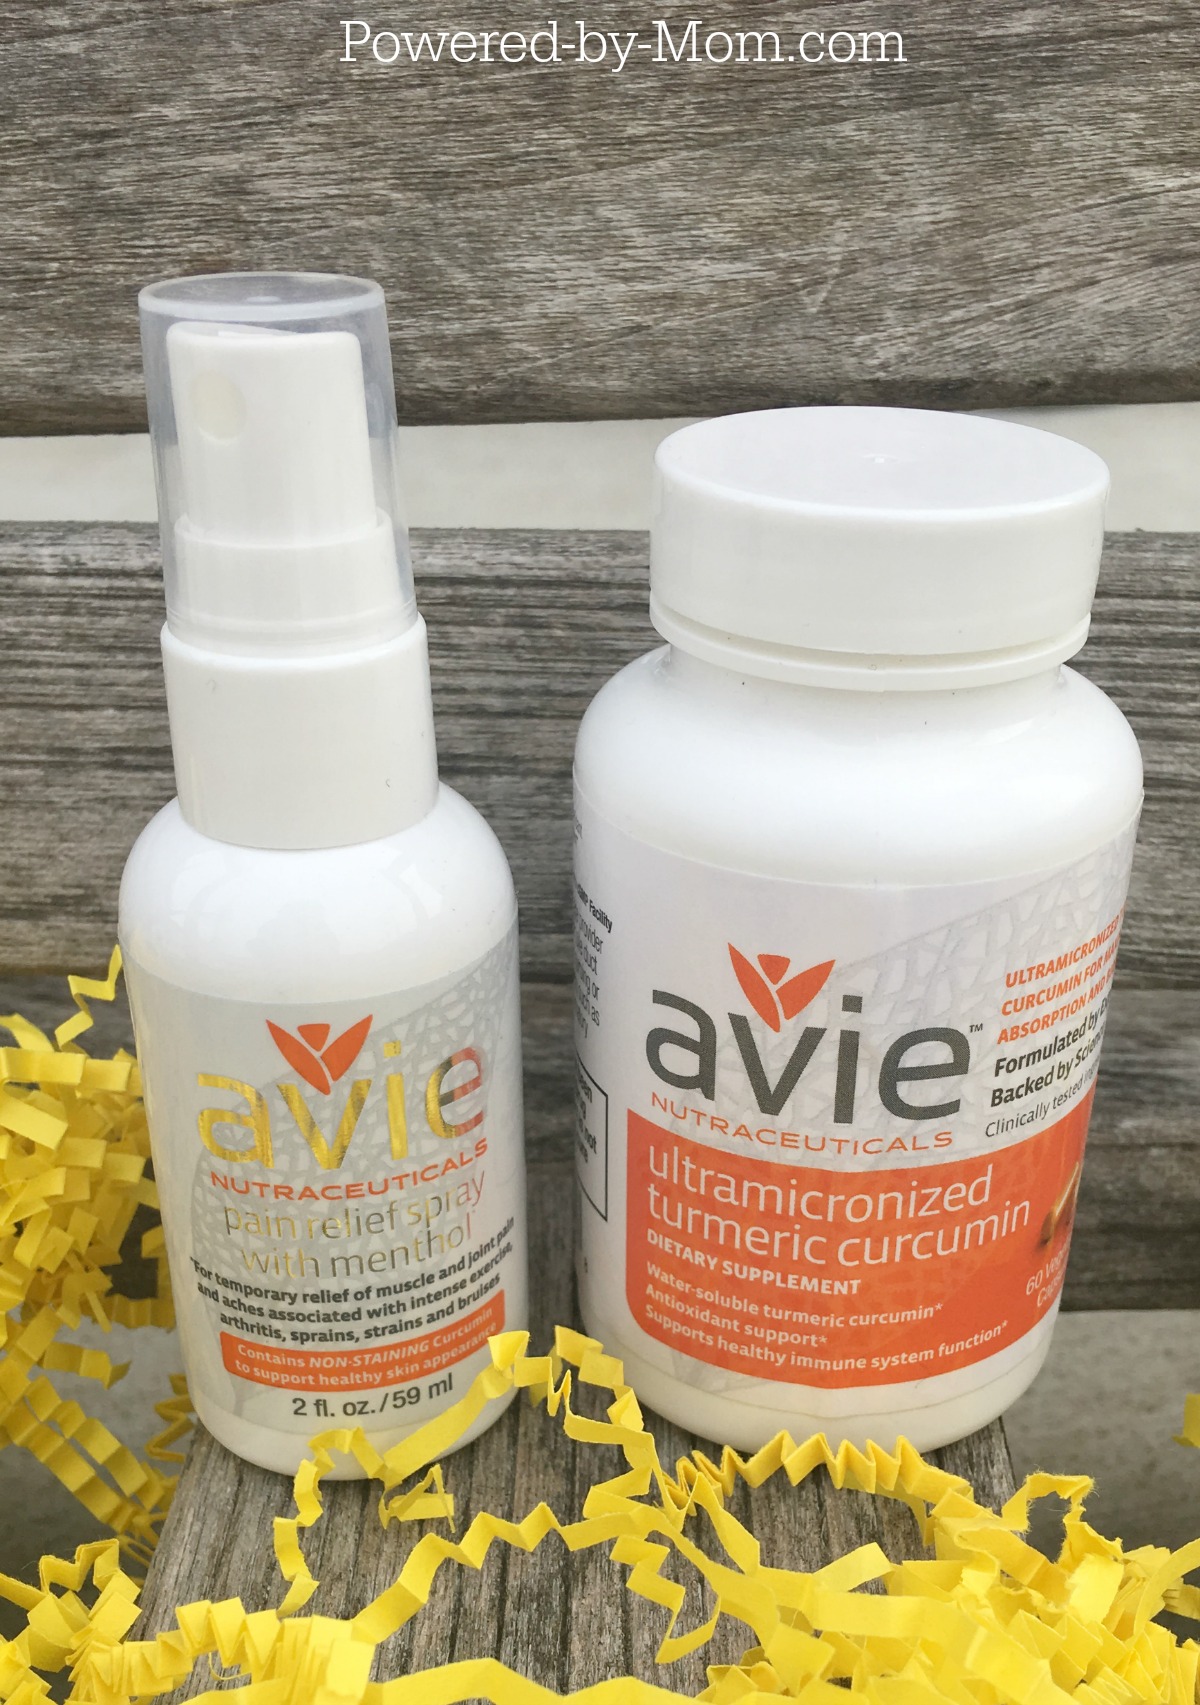 avie Nutraceuticals Pain Relief Spray - Powered by Mom